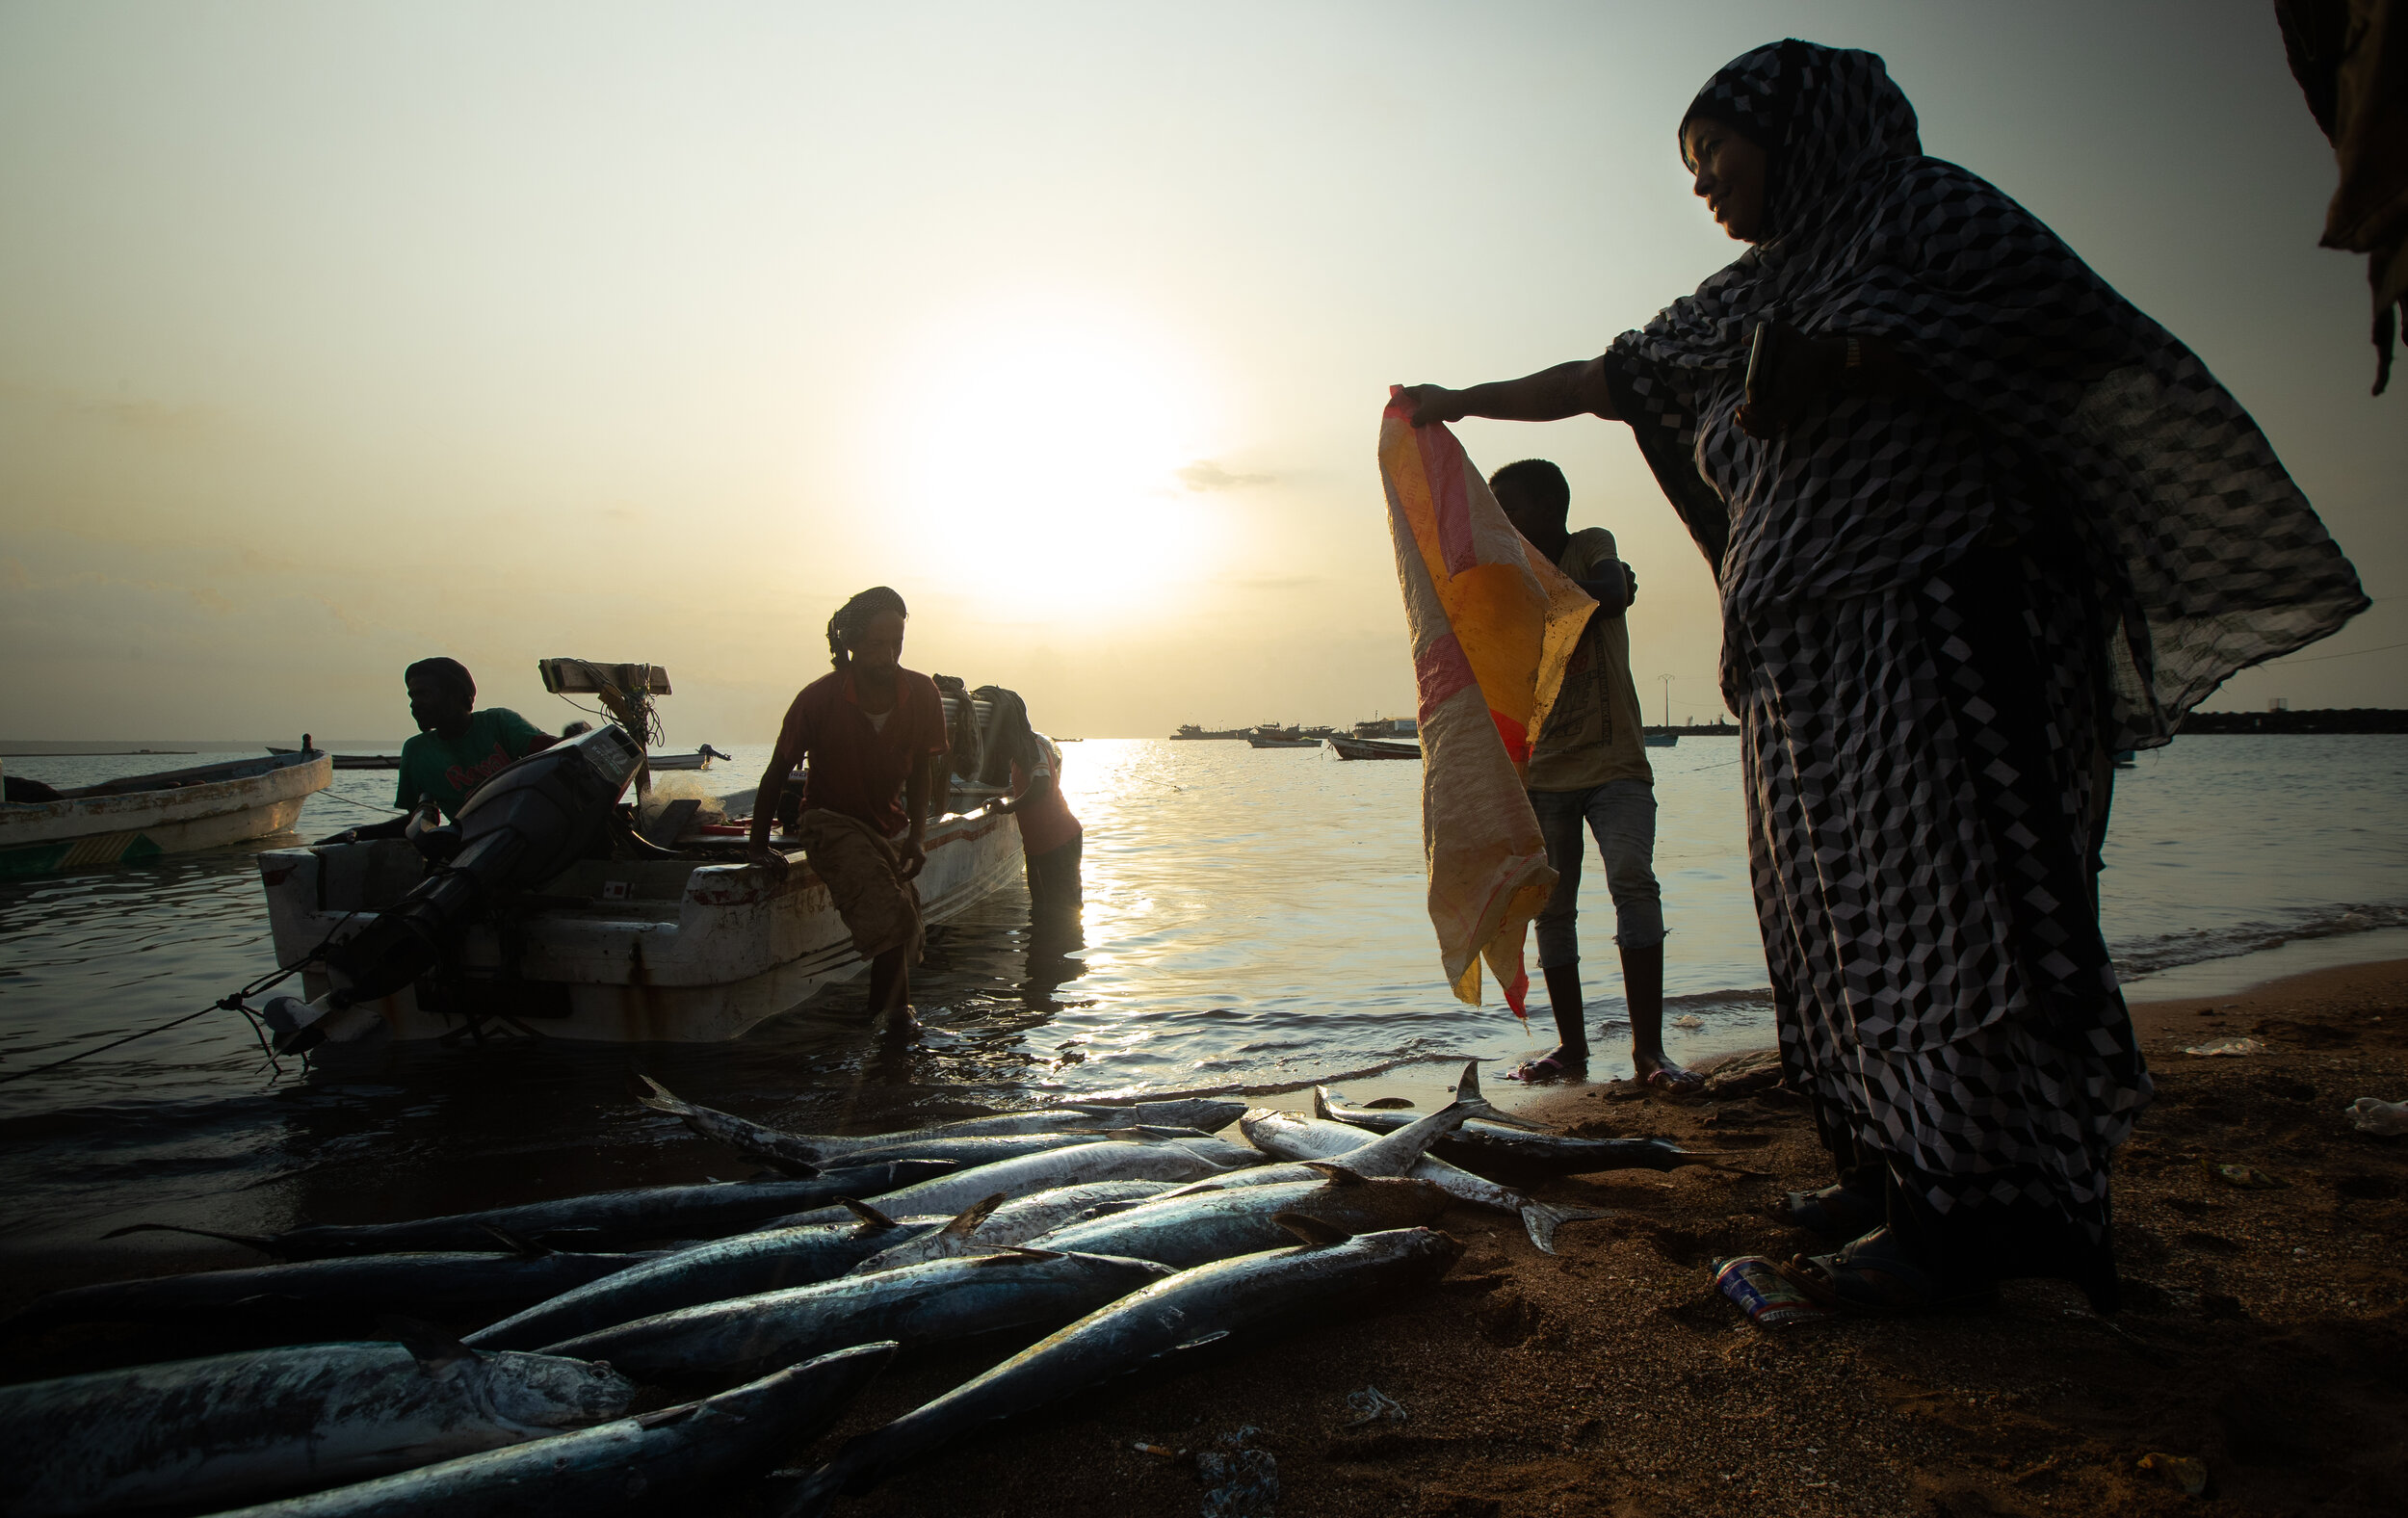  the fishermen of Obock show Aisha, their leader, their respect while she preserves her grandfather’s legacy. Obock, Djibouti, 2019 